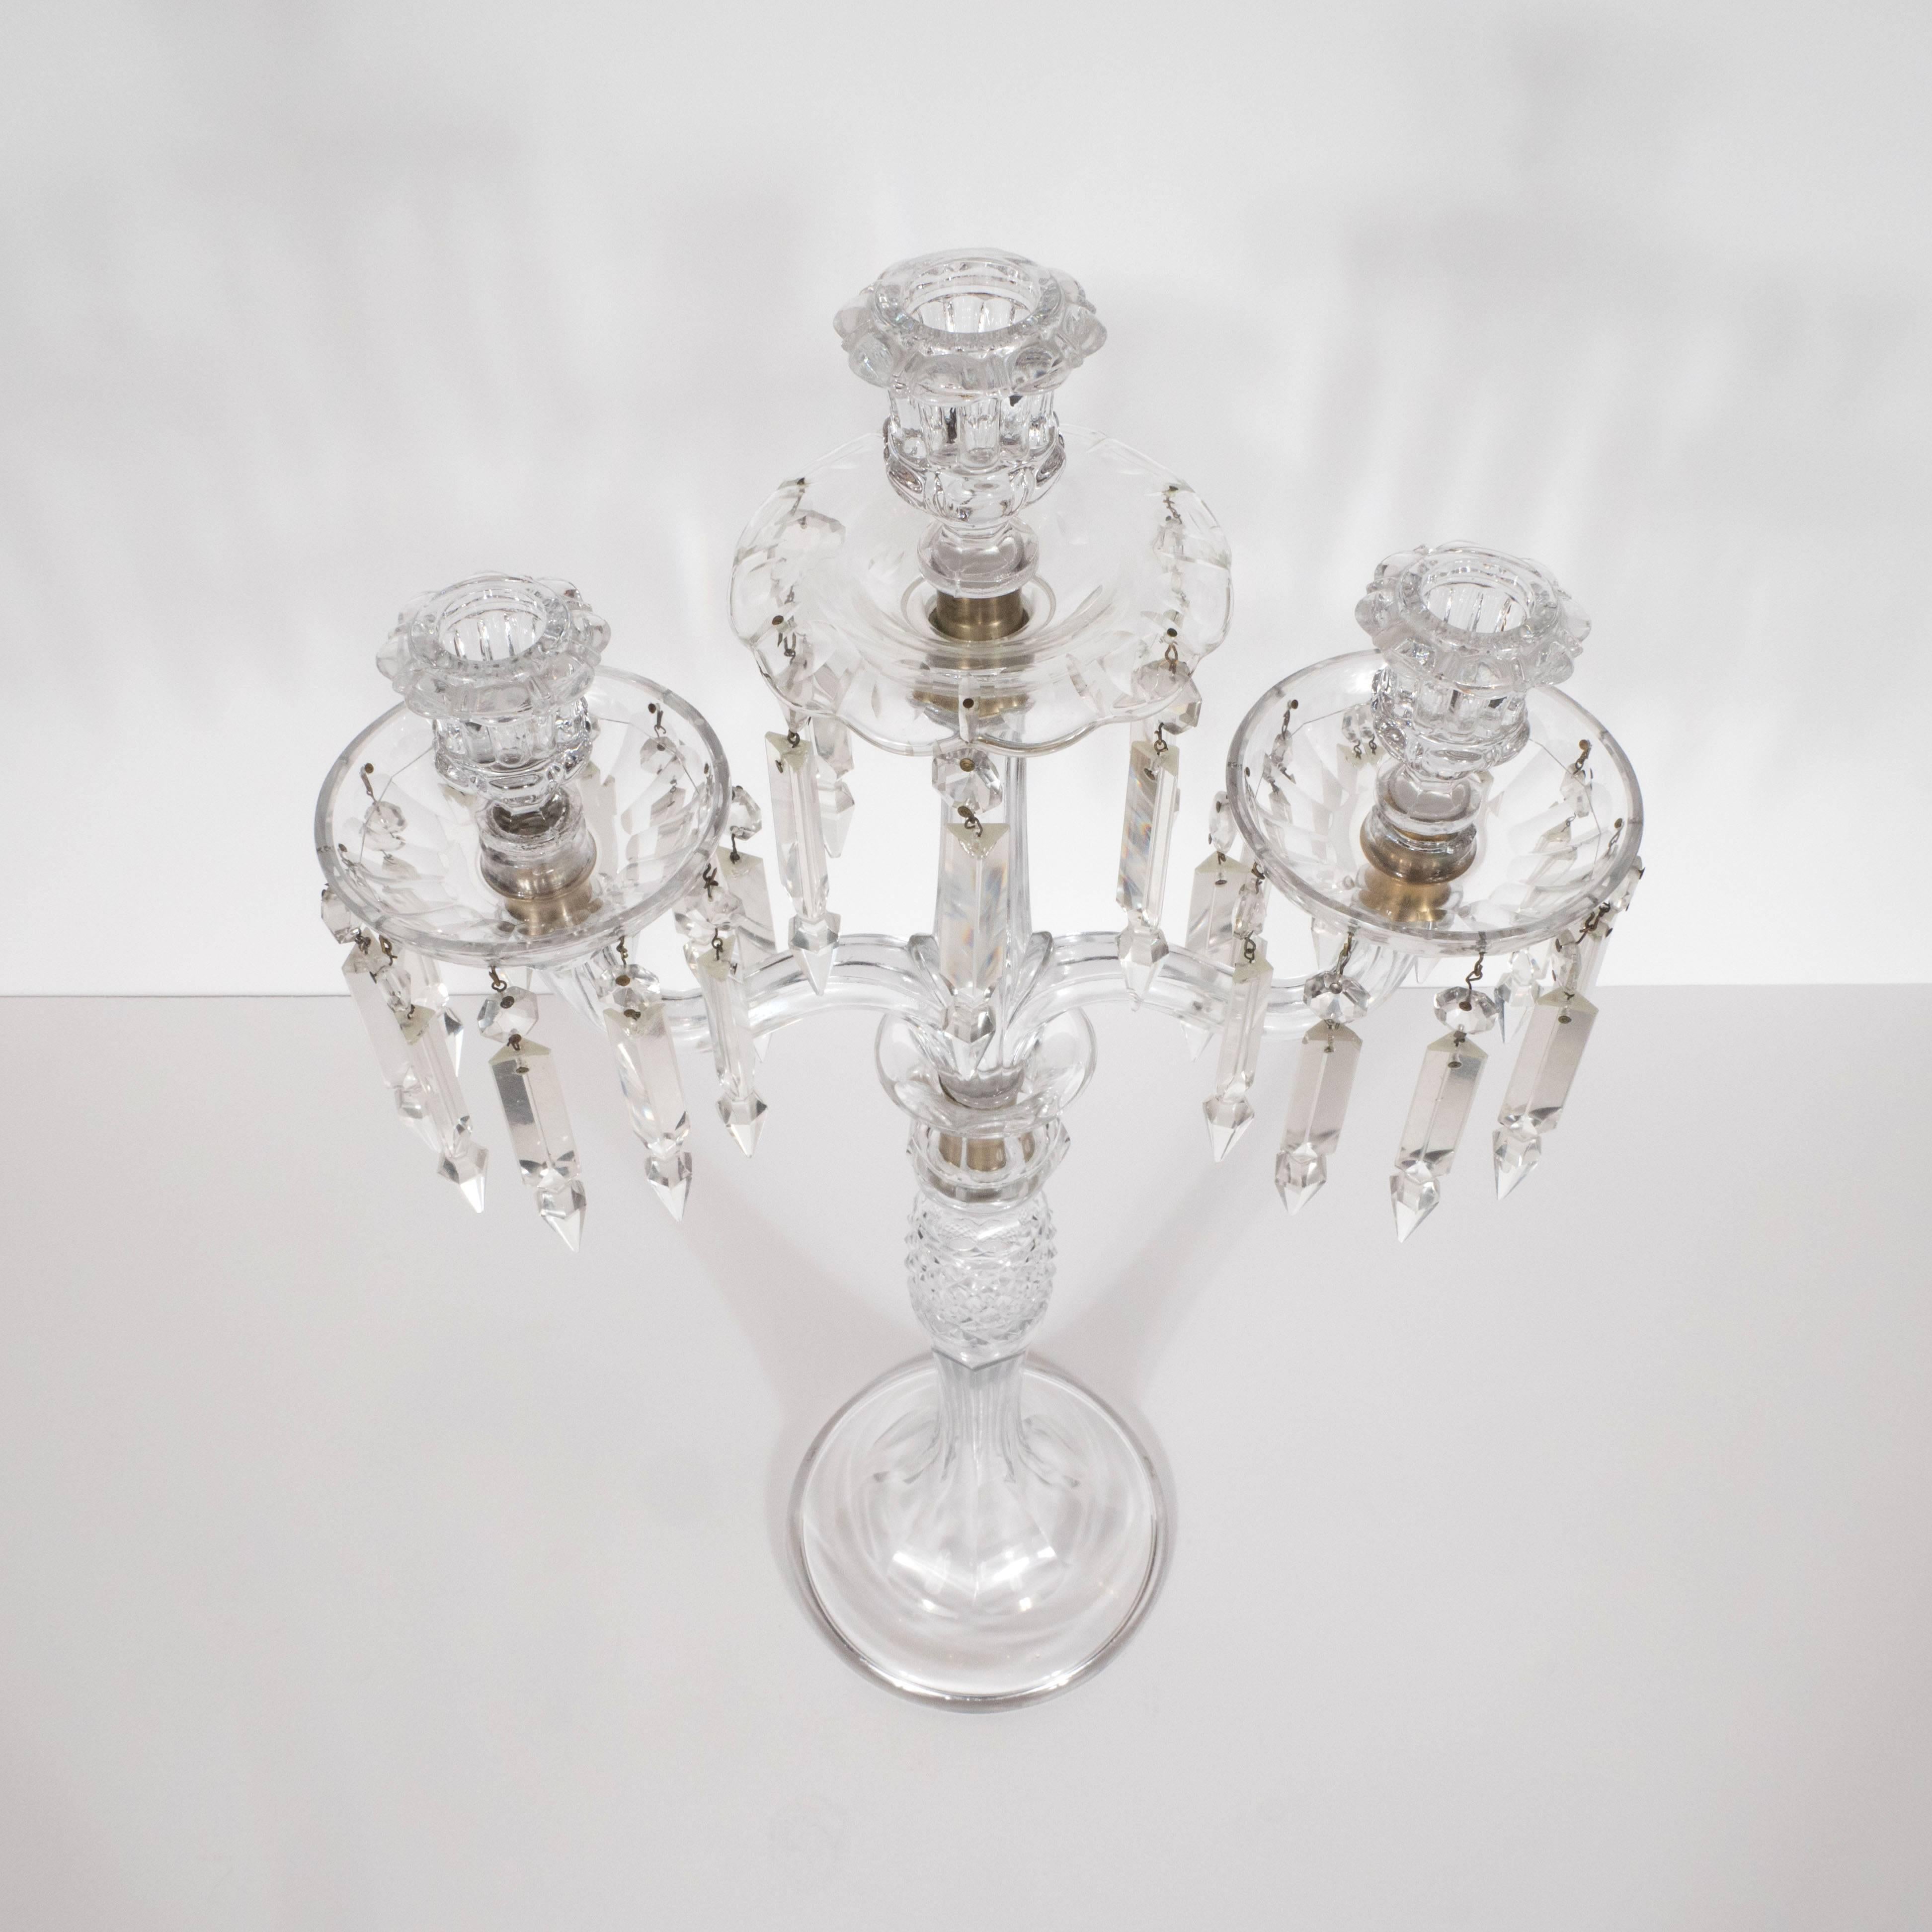 This exquisite pair of crystal girandoles features a central stem with two scroll form arms branching off to support convex canopies to catch melting wax and stylized floral candleholders. The central stem offers a circular base and a reeded pattern